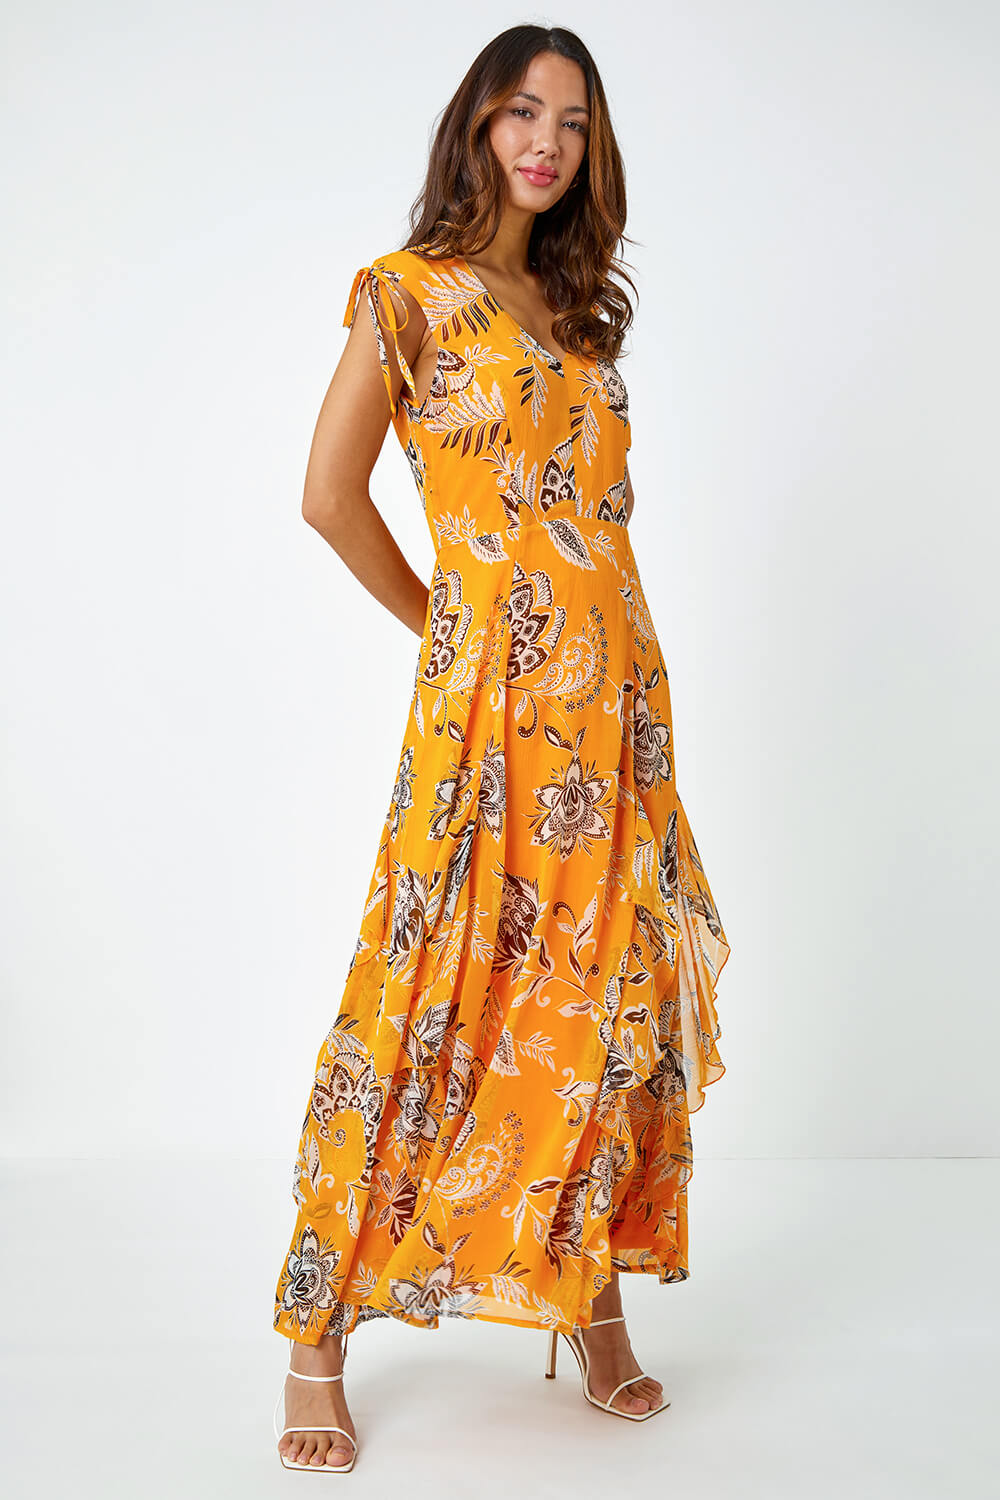 Yellow Sleeveless Floral Frill Maxi Dress, Image 2 of 5